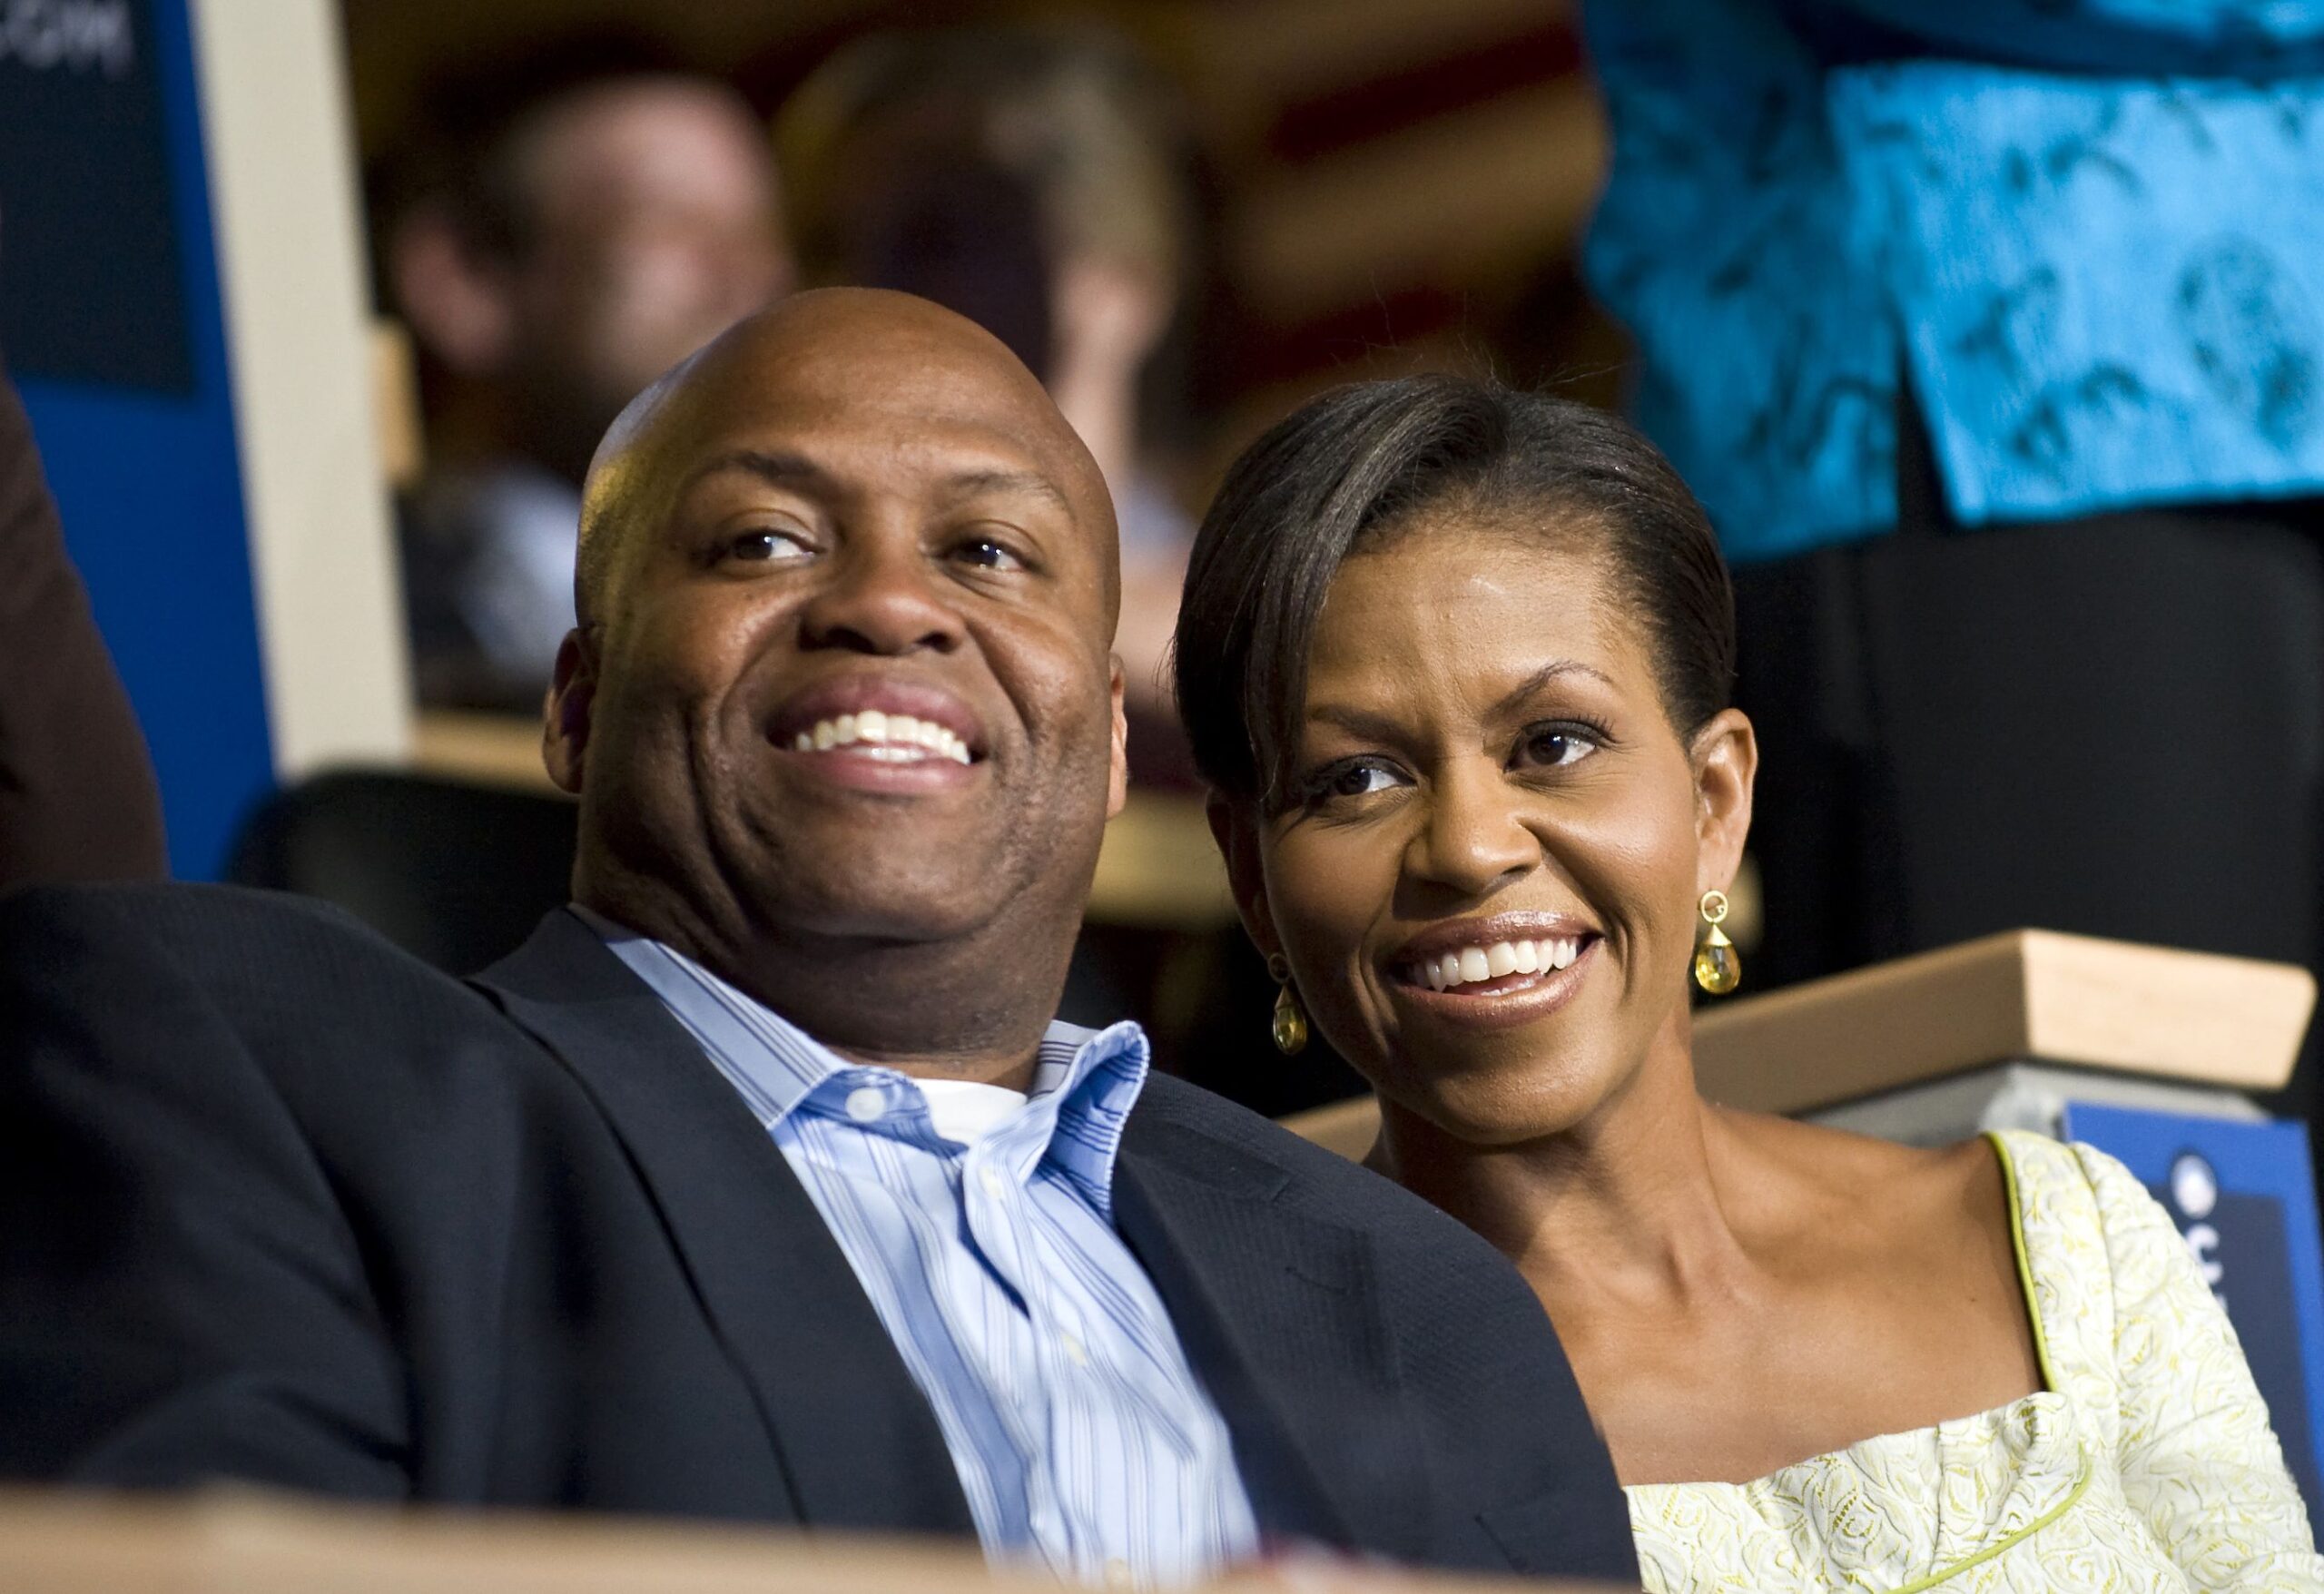 Michelle Obama's Brother Recalls 'Terrifying' Interaction With Chicago PD Accusing Him of Stealing His Own Bike